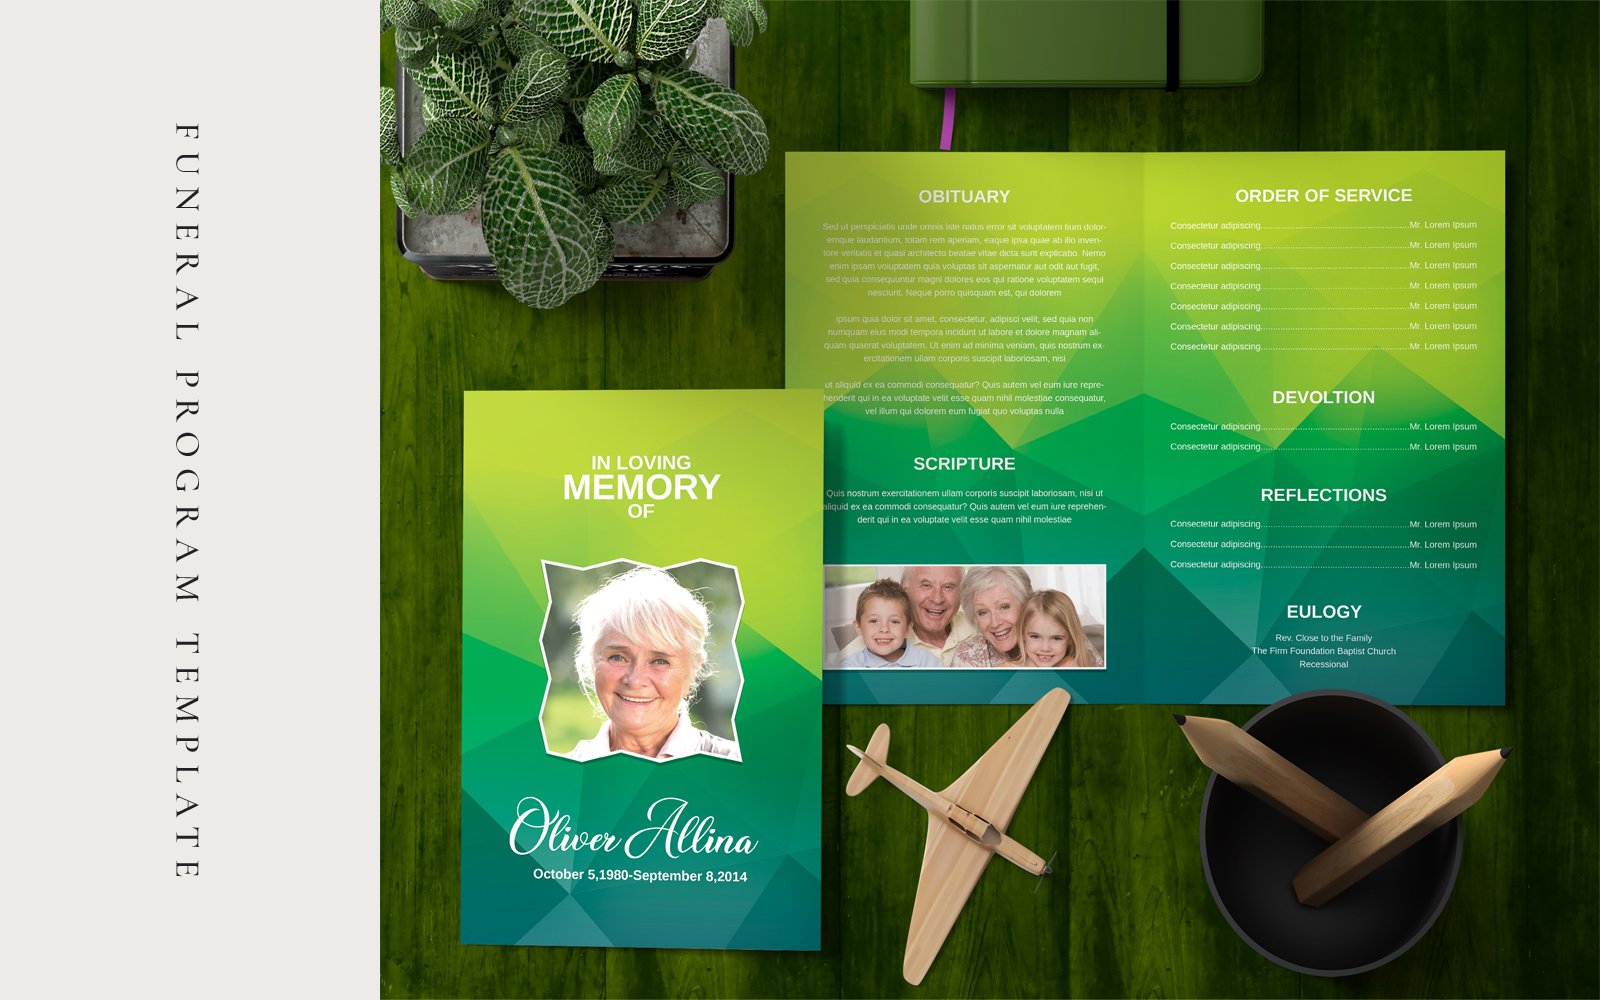 Abstract Funeral Program - Corporate Identity Template